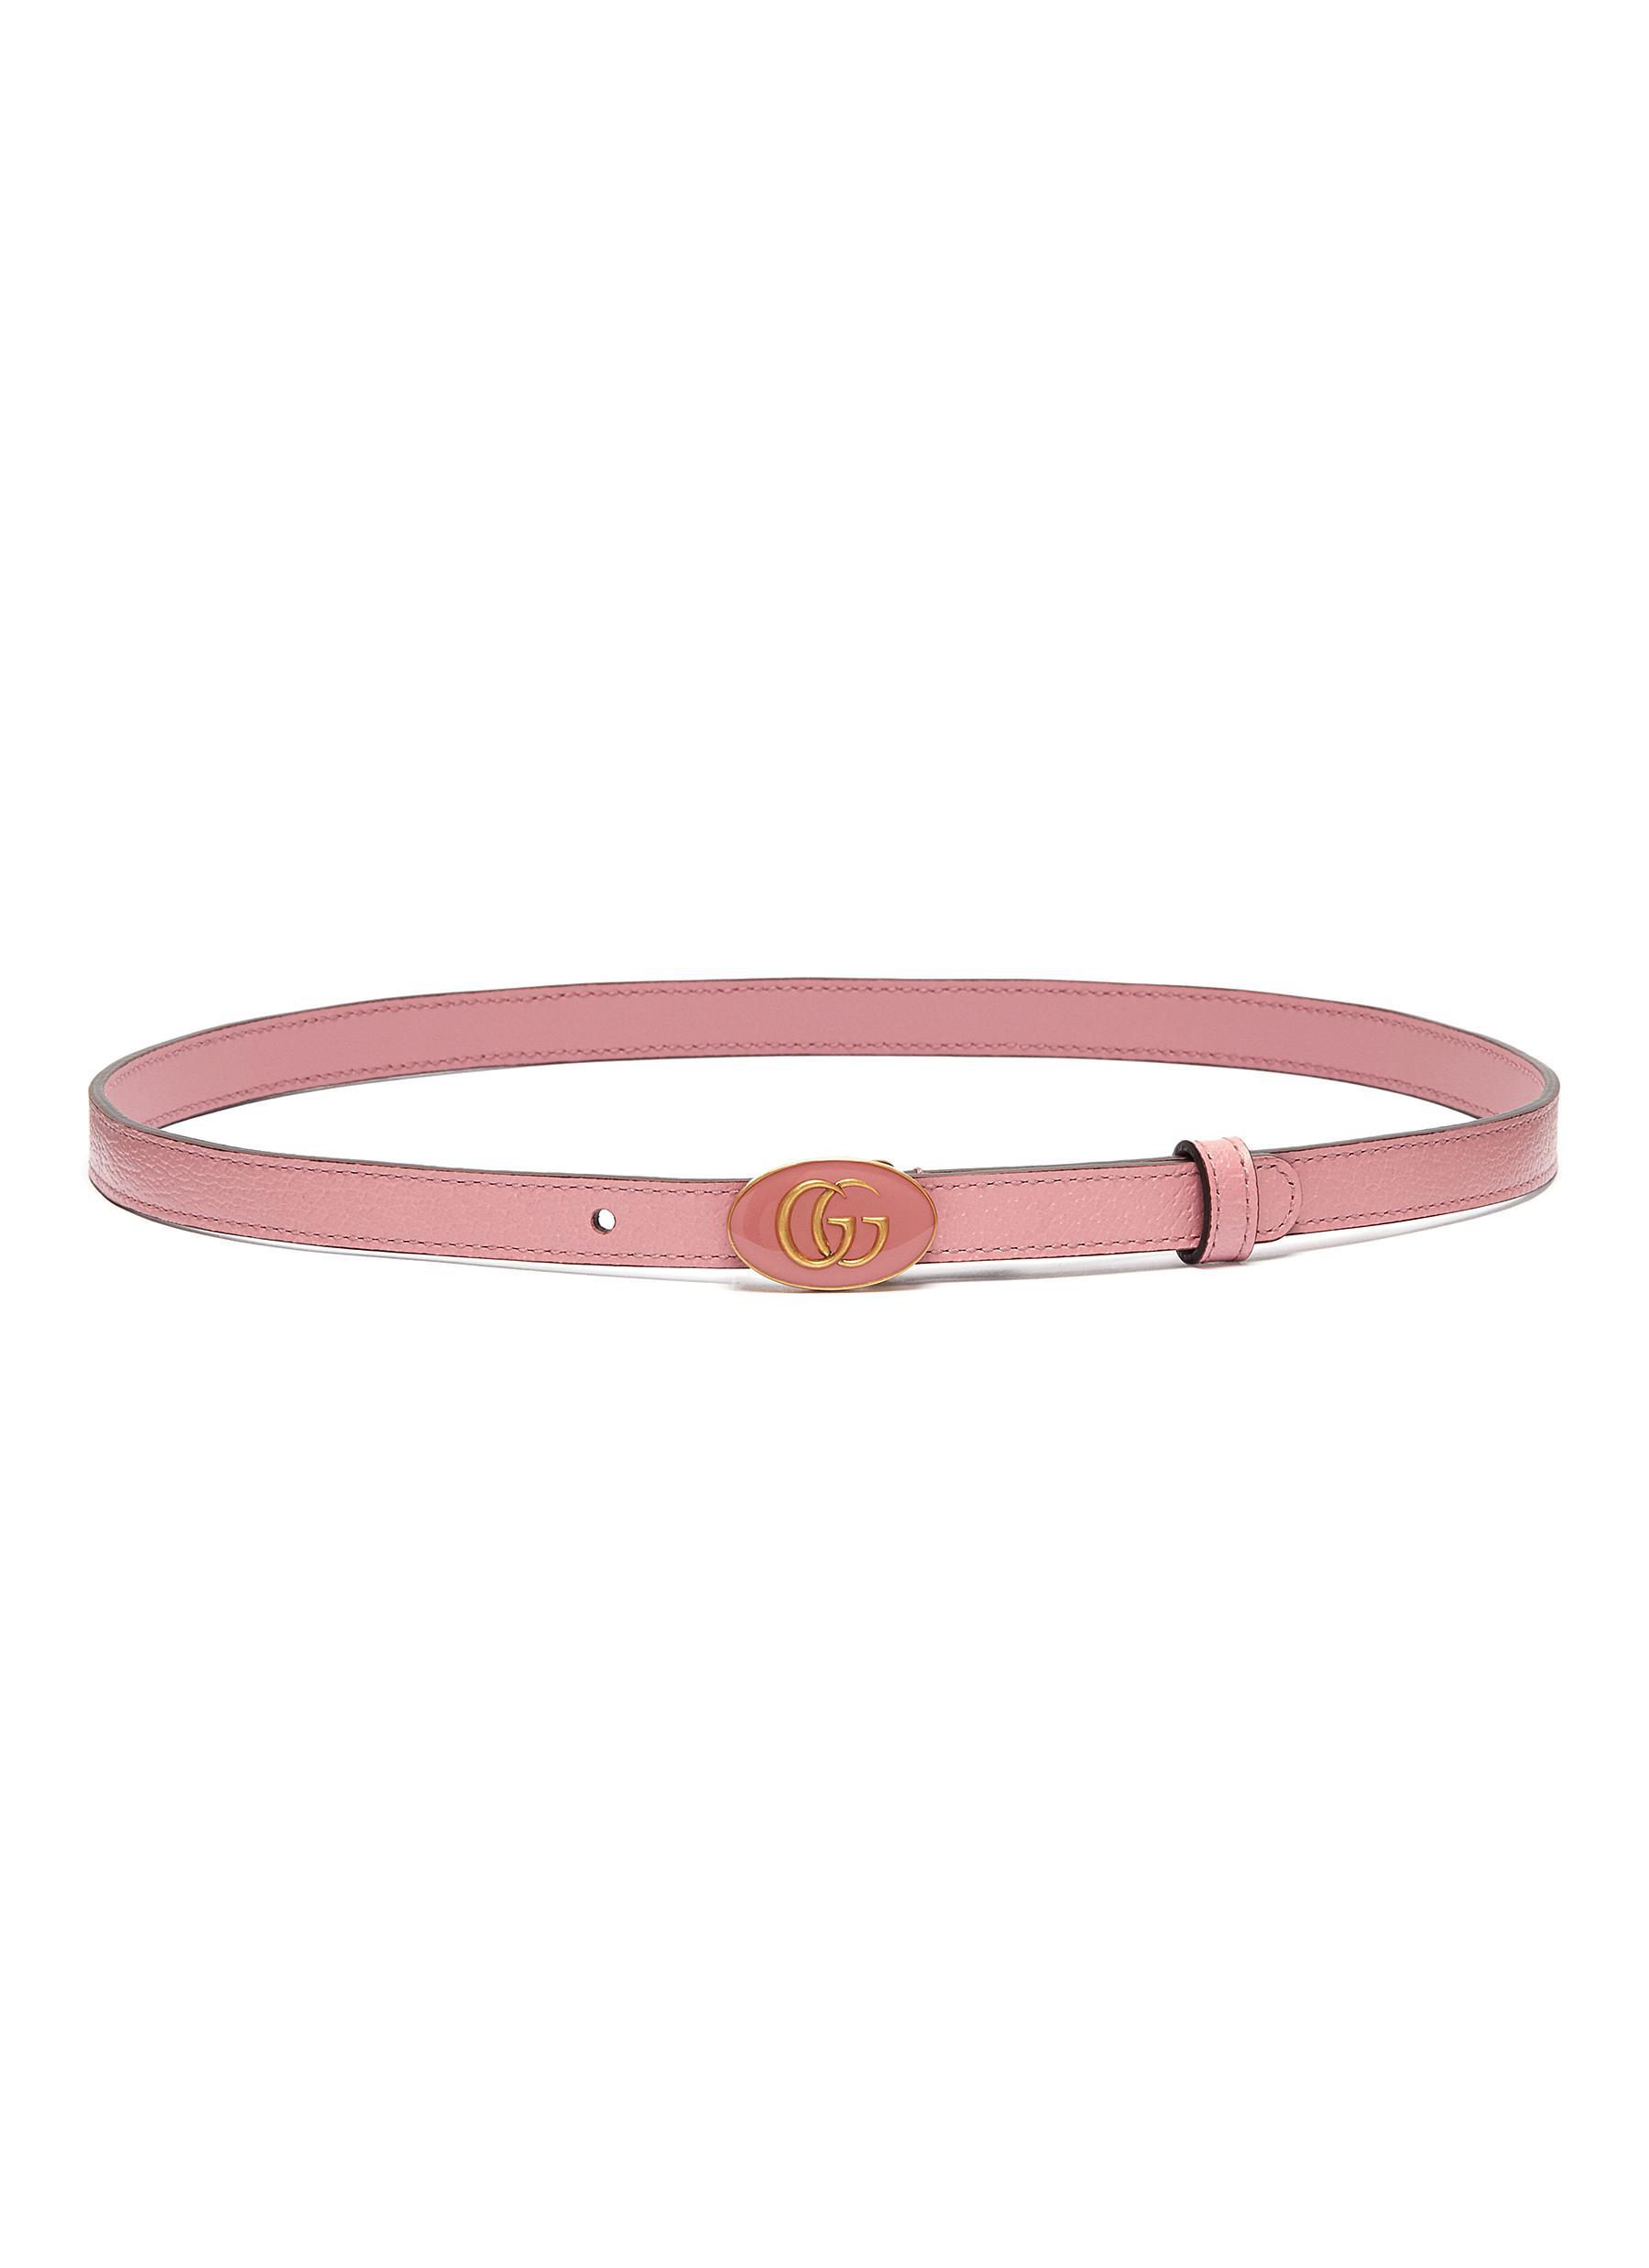 GUCCI: leather belt with double G - Pink  Gucci belt 4327071OY0G online at